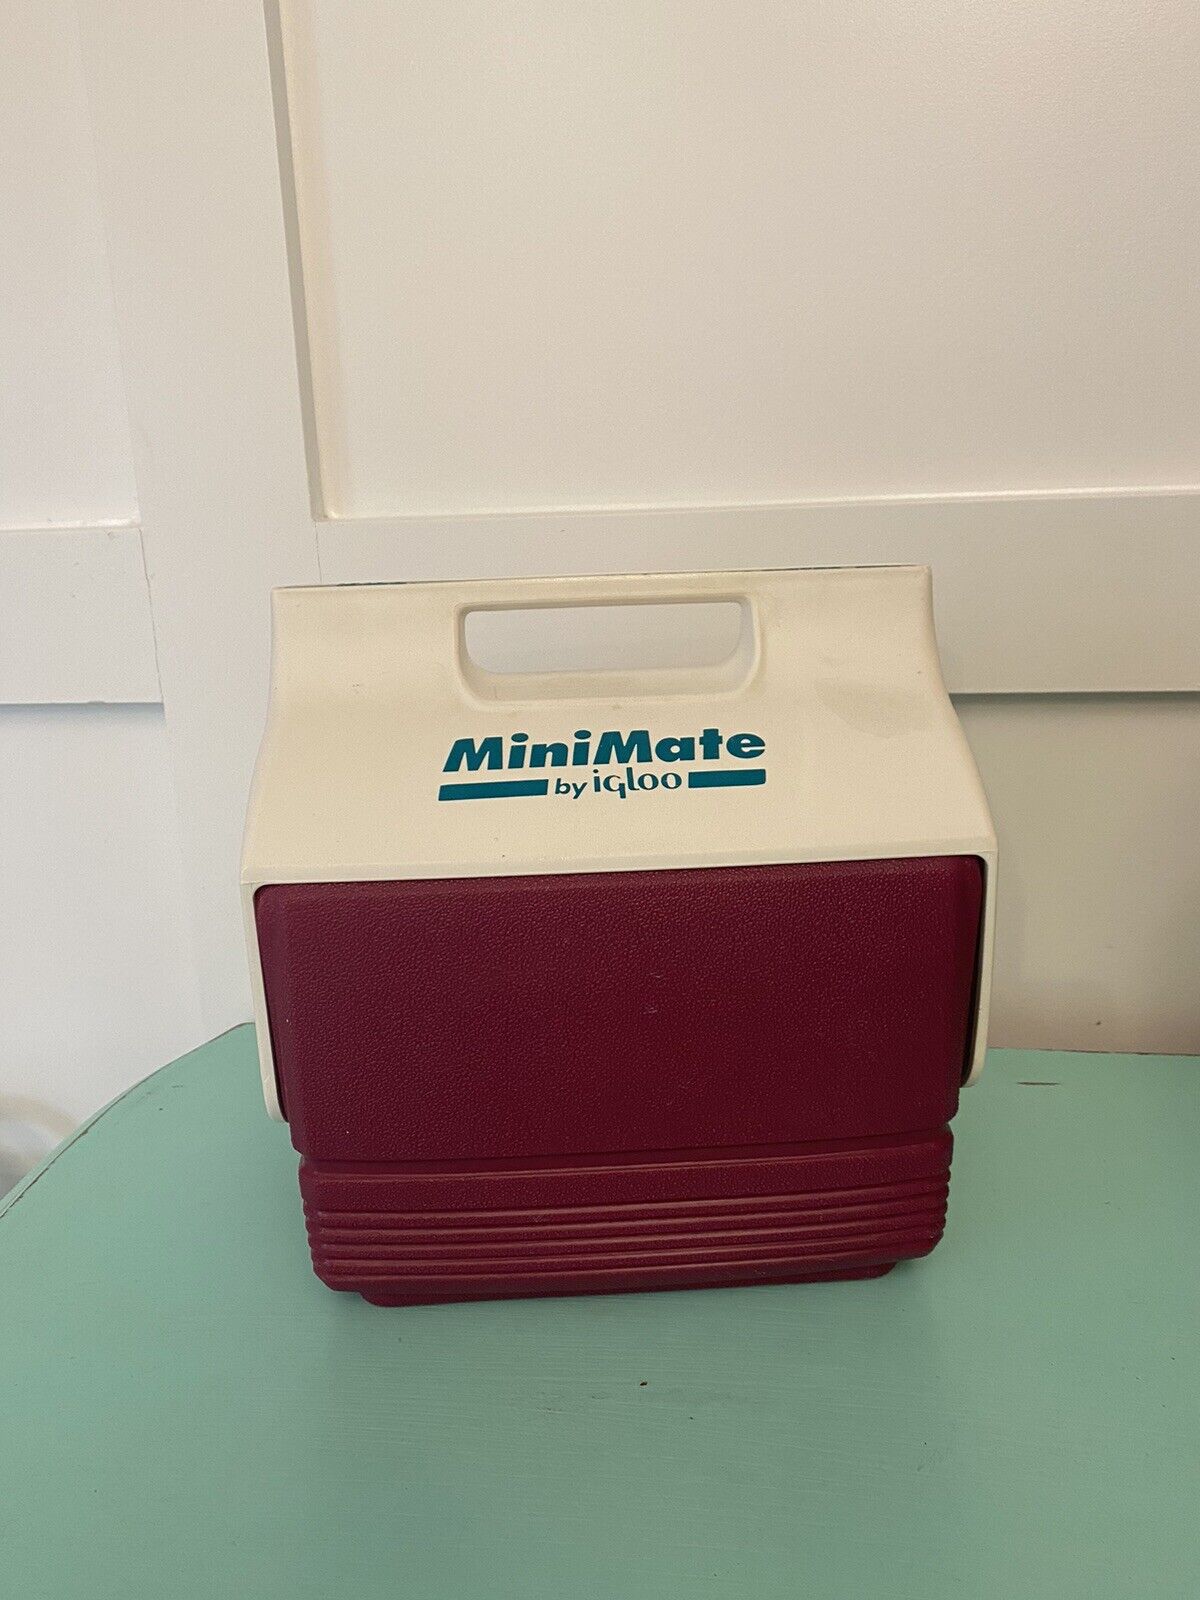 Vintage Igloo Mini Mate Small Personal Lunch Box Cooler Retro Red